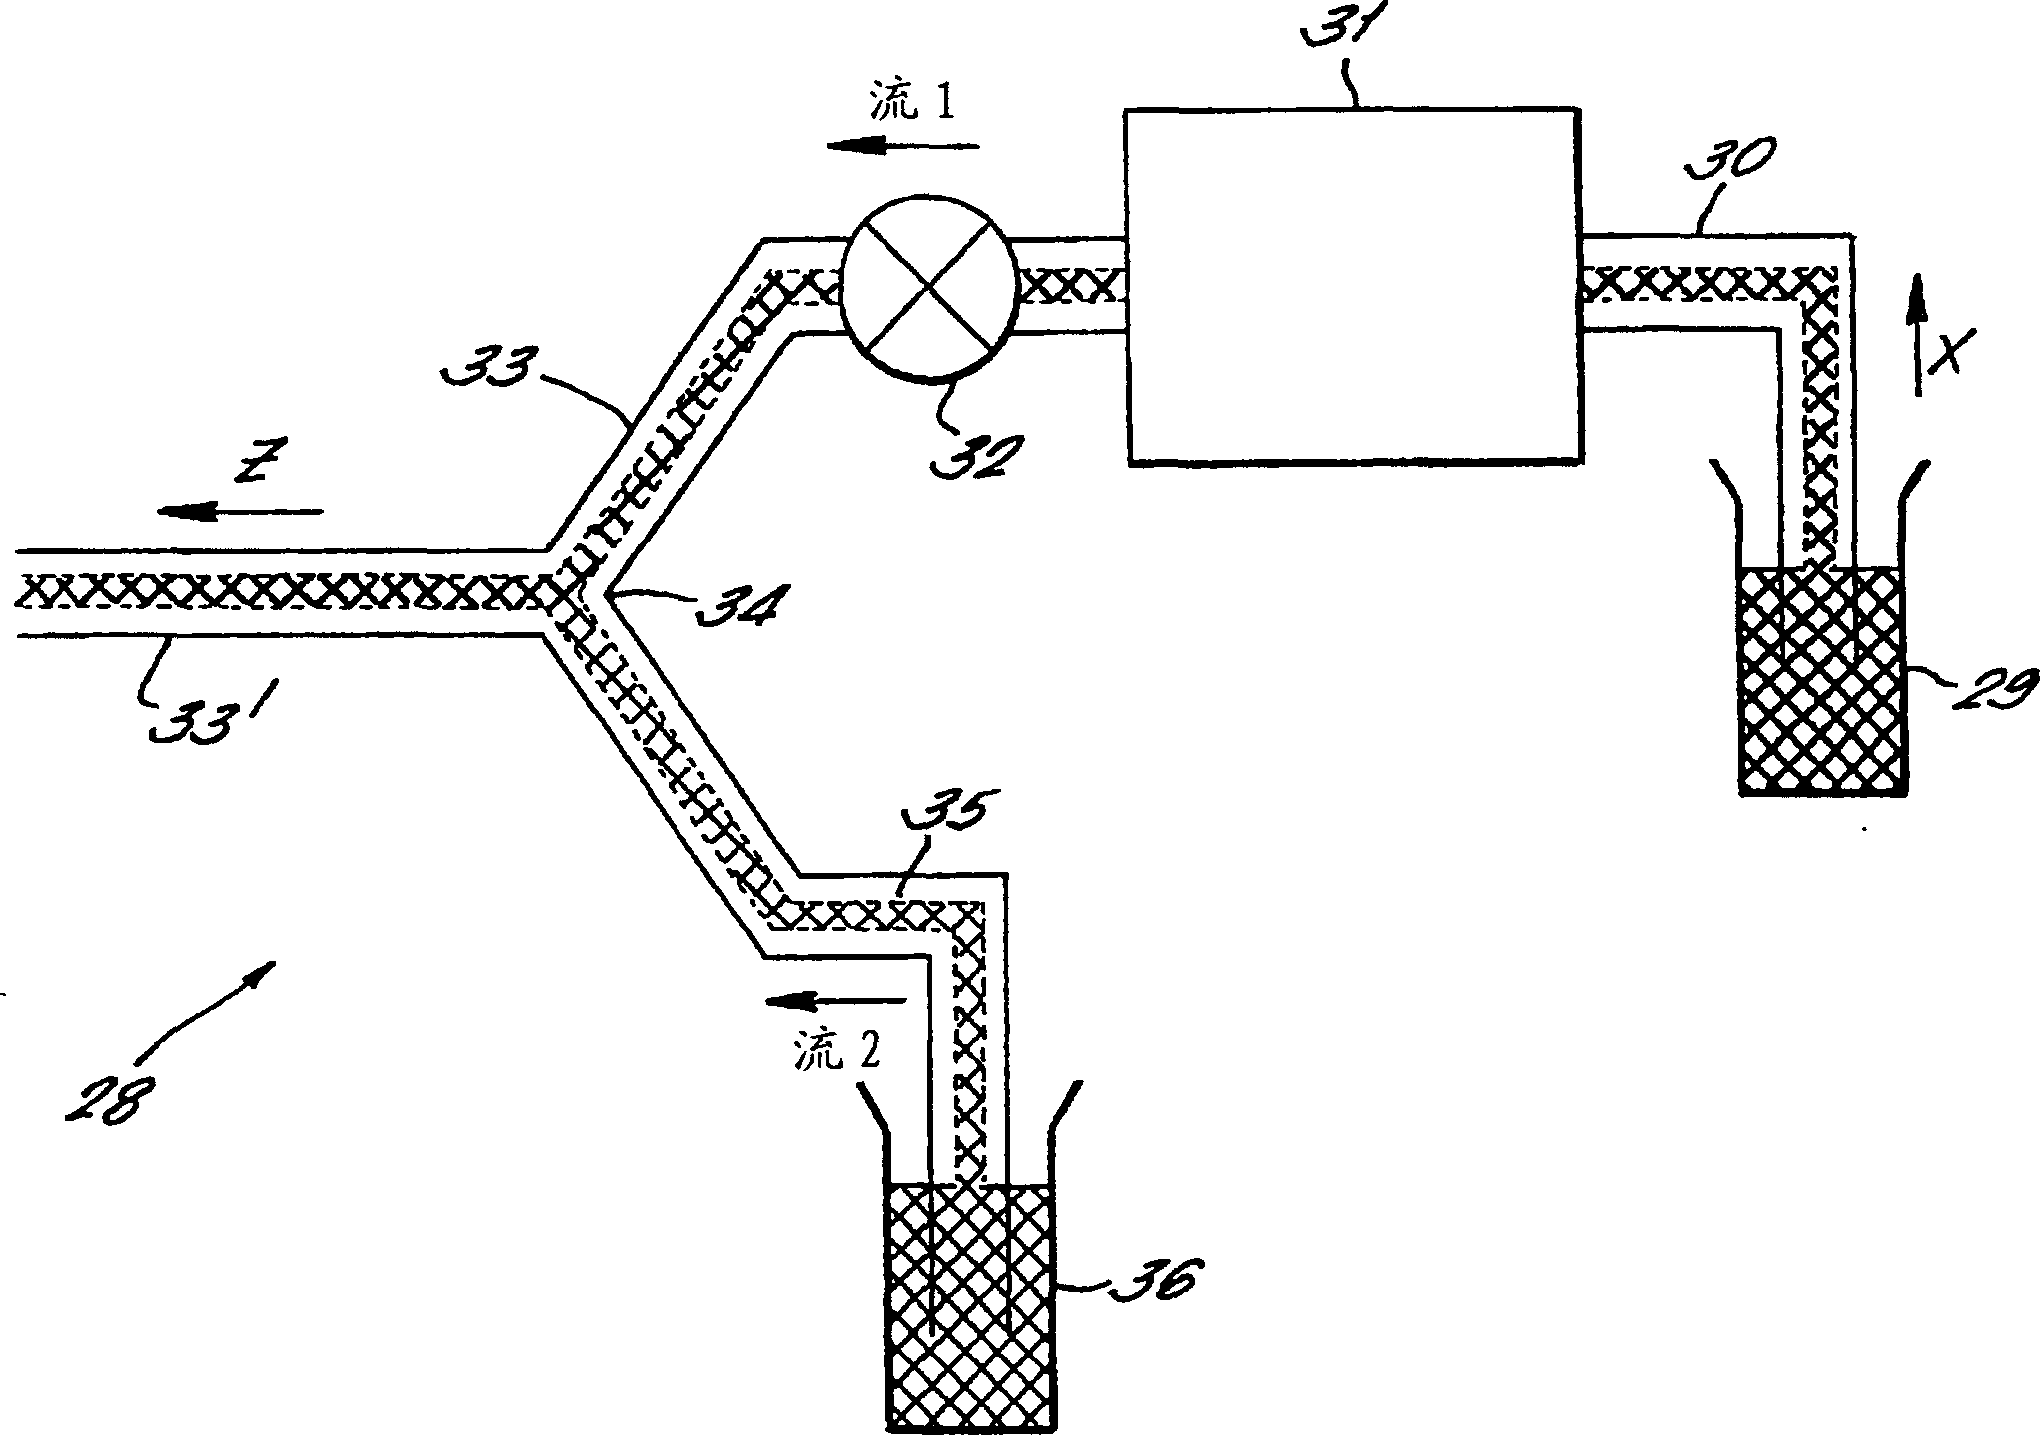 Method and apparatus for pumping and diluting a sample